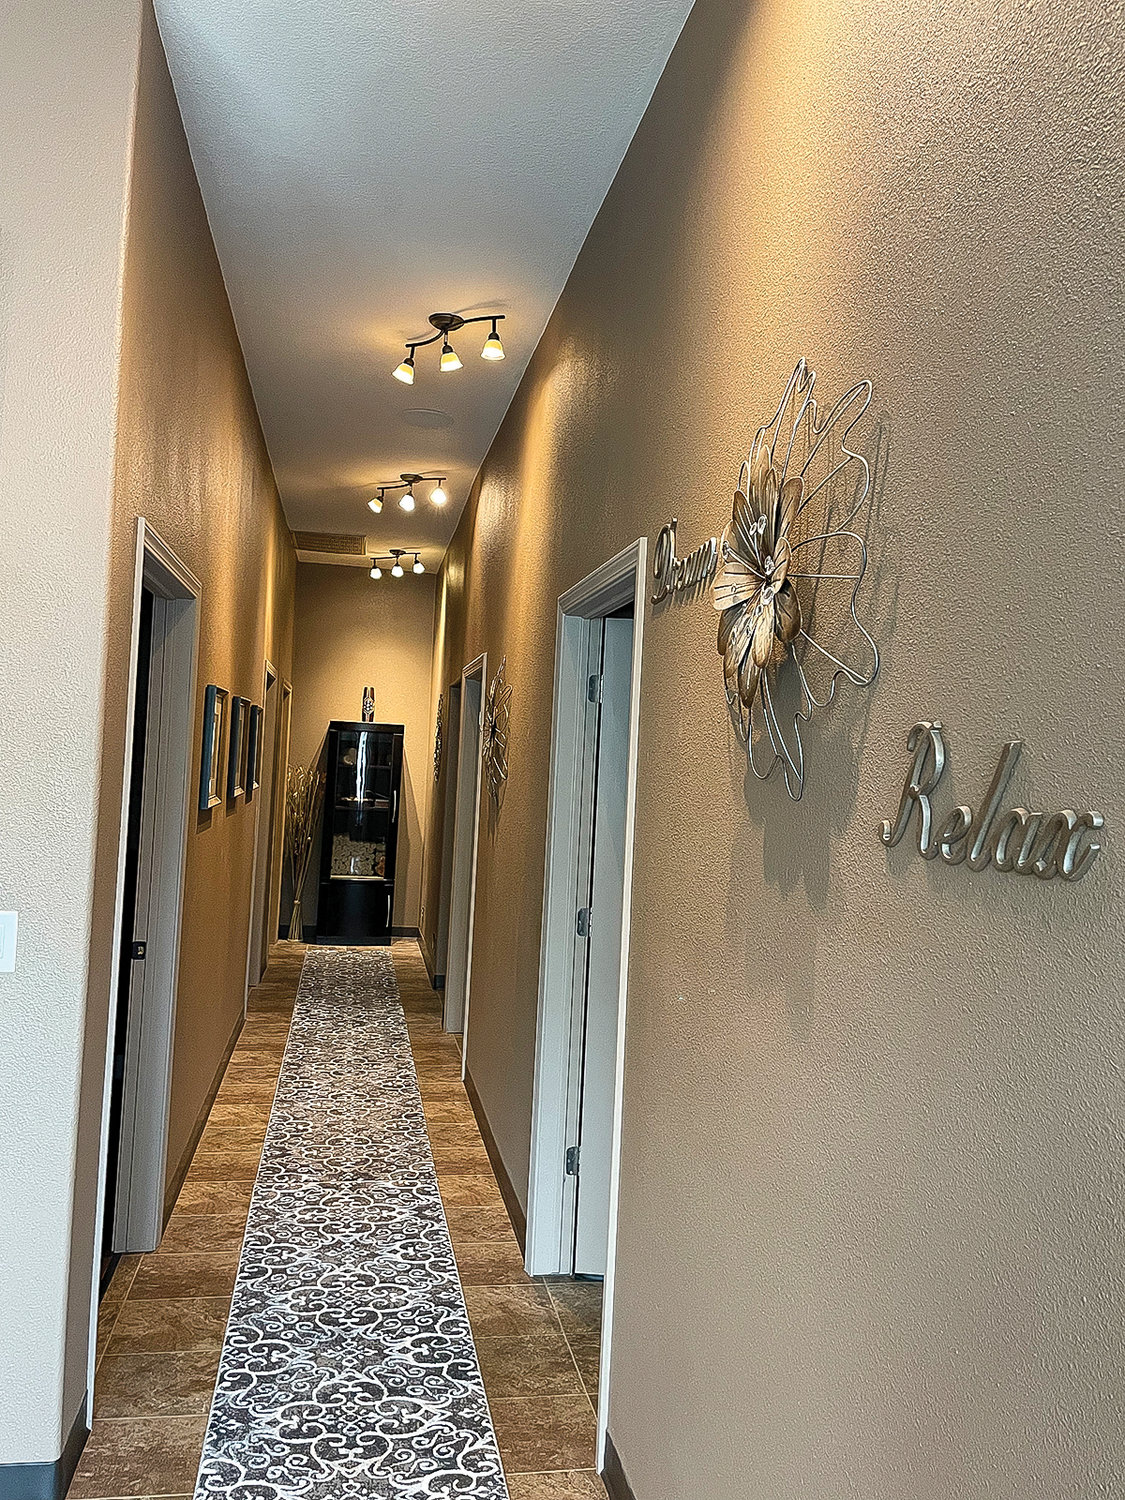 A hallway leads to spa rooms at Bodywork Devine in Ridgefield.